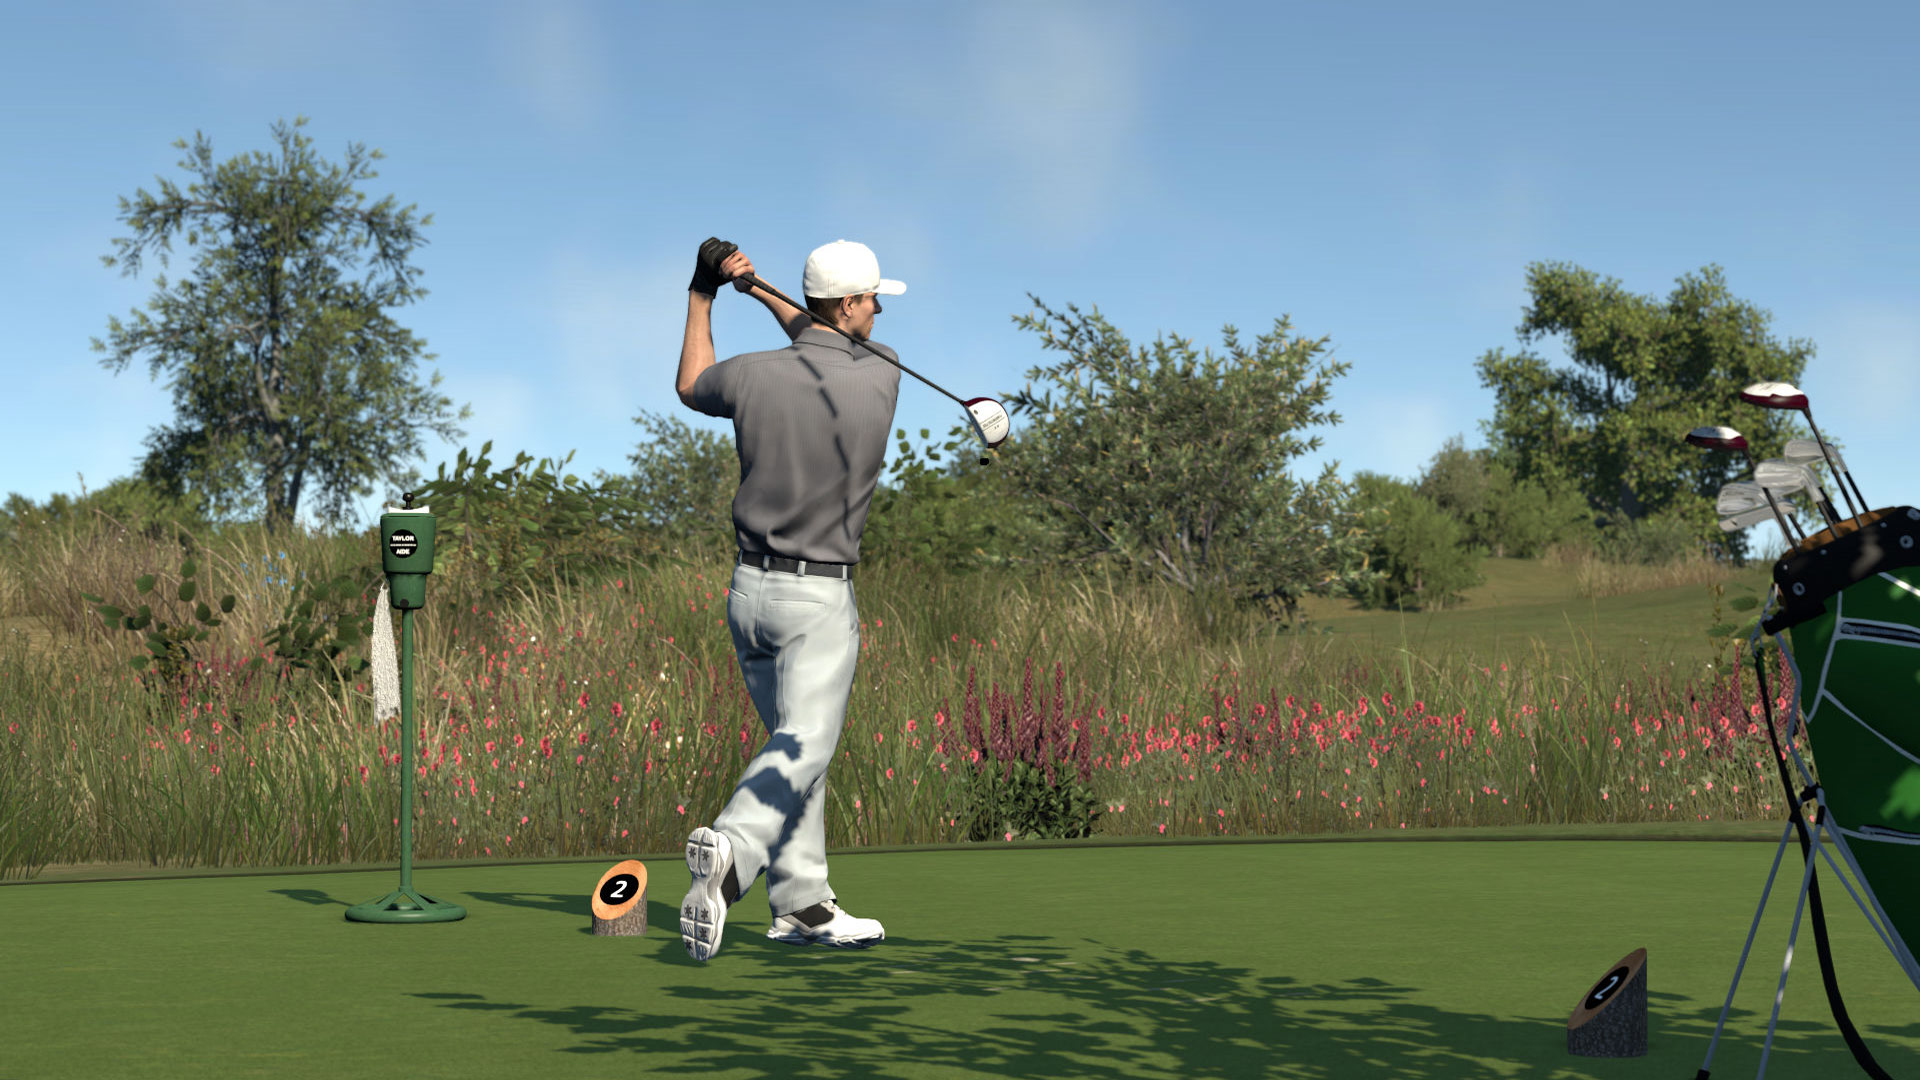 The Golf Club 2 – What Can It Achieve?